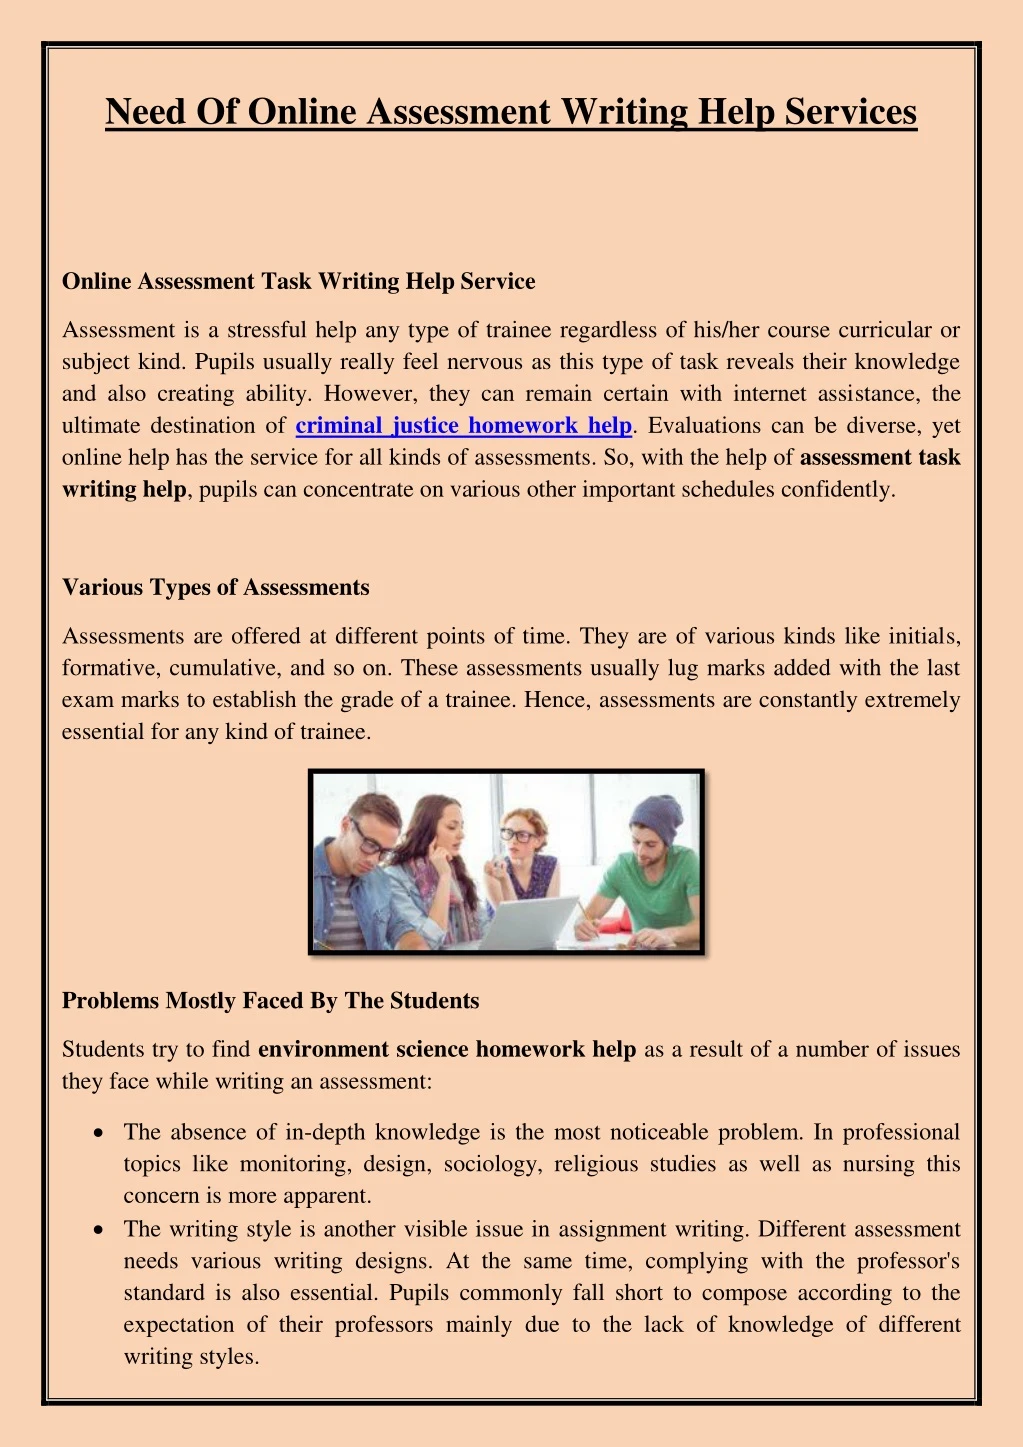 need of online assessment writing help services